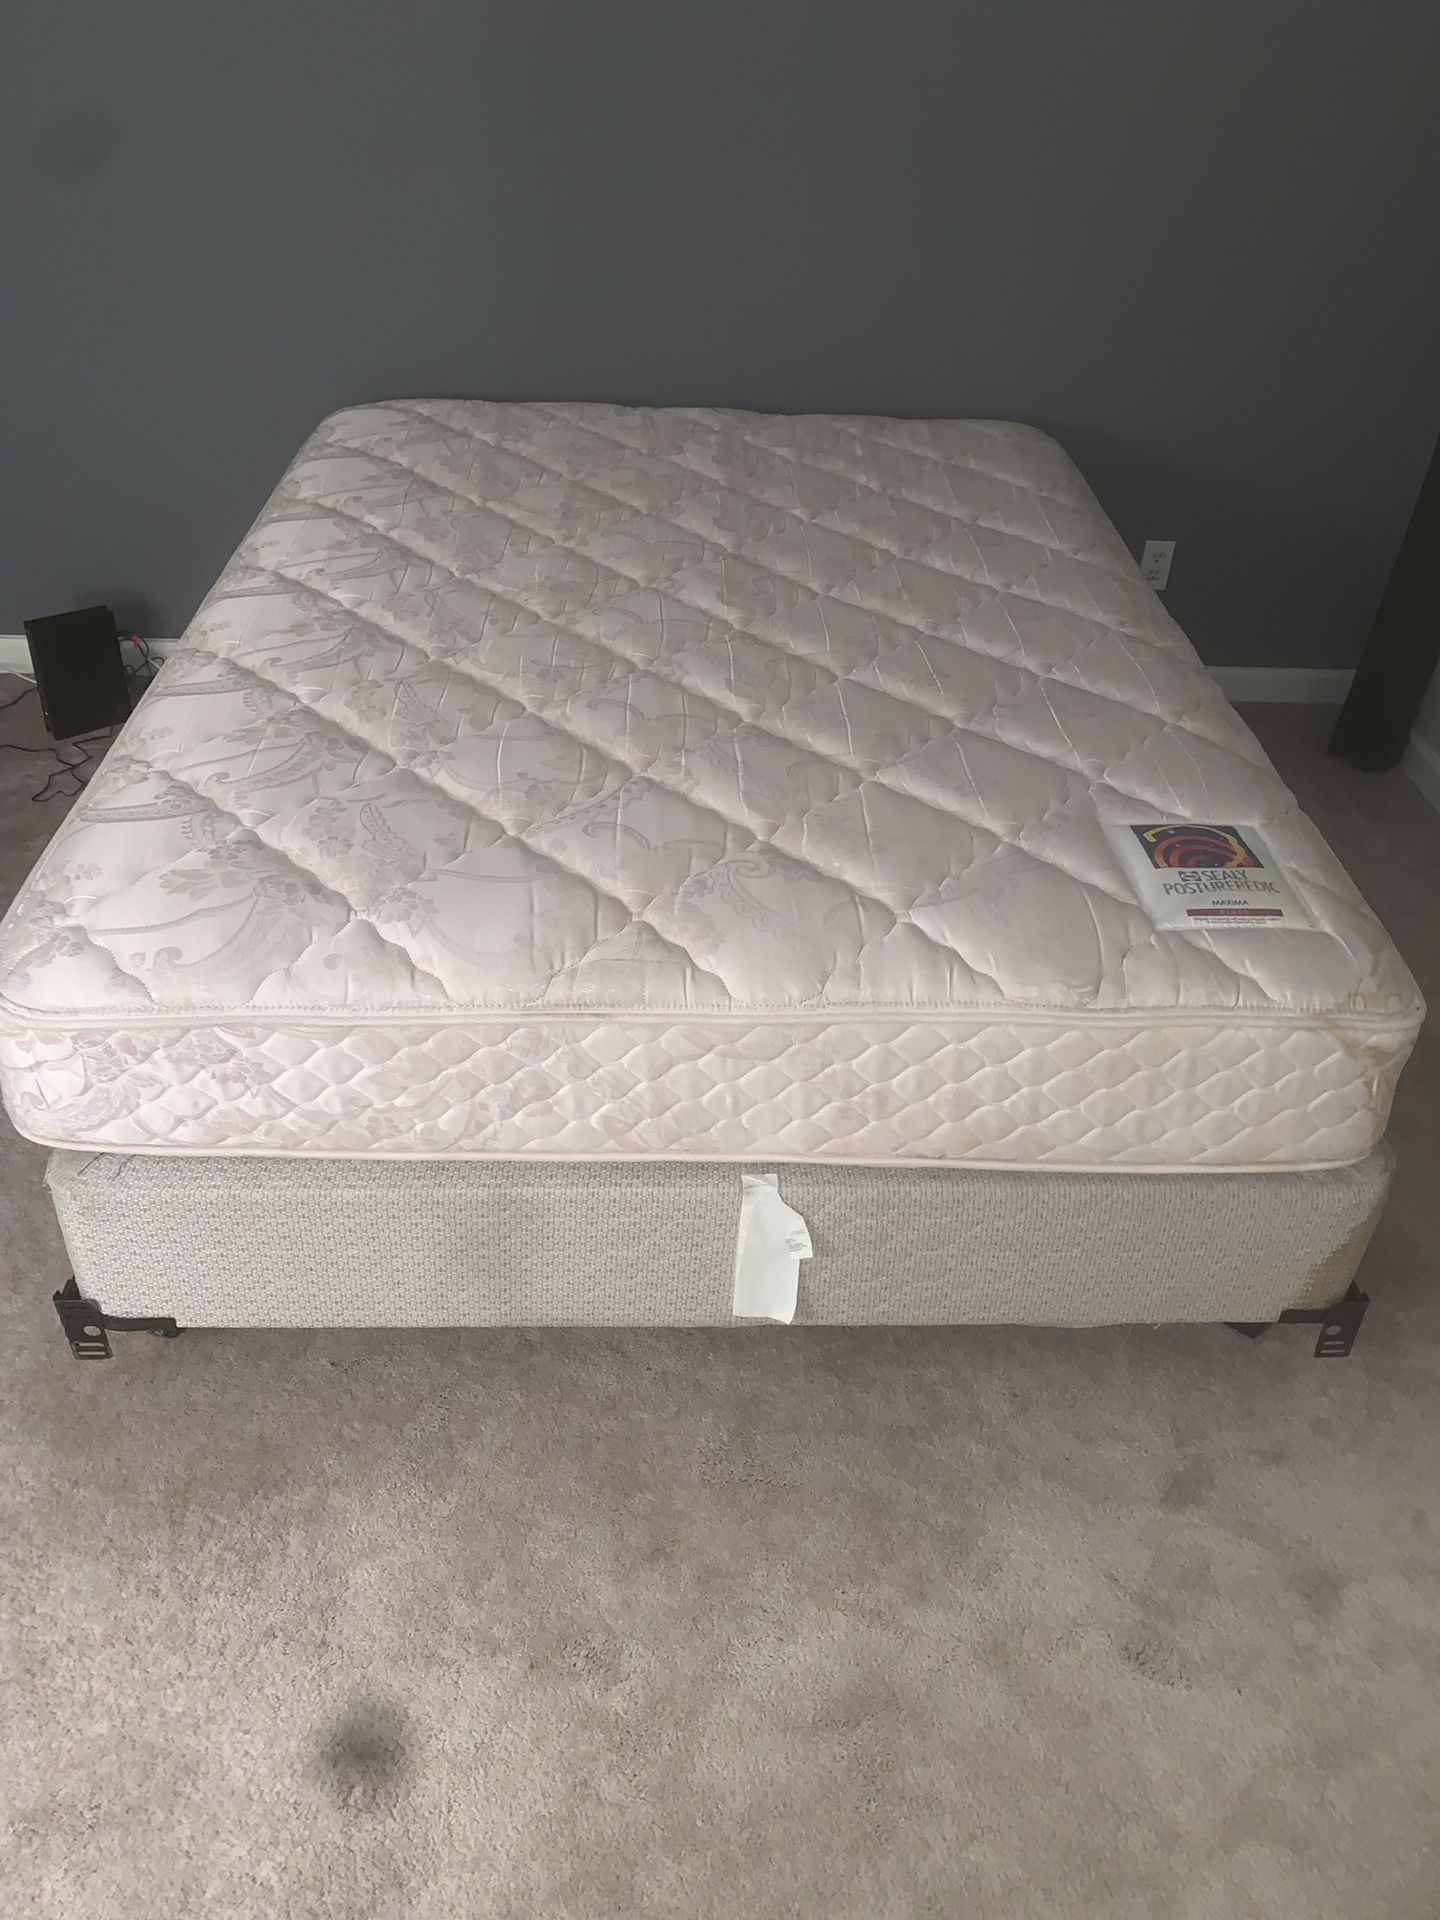 FREE queen bed set has to go by fri night 11/15